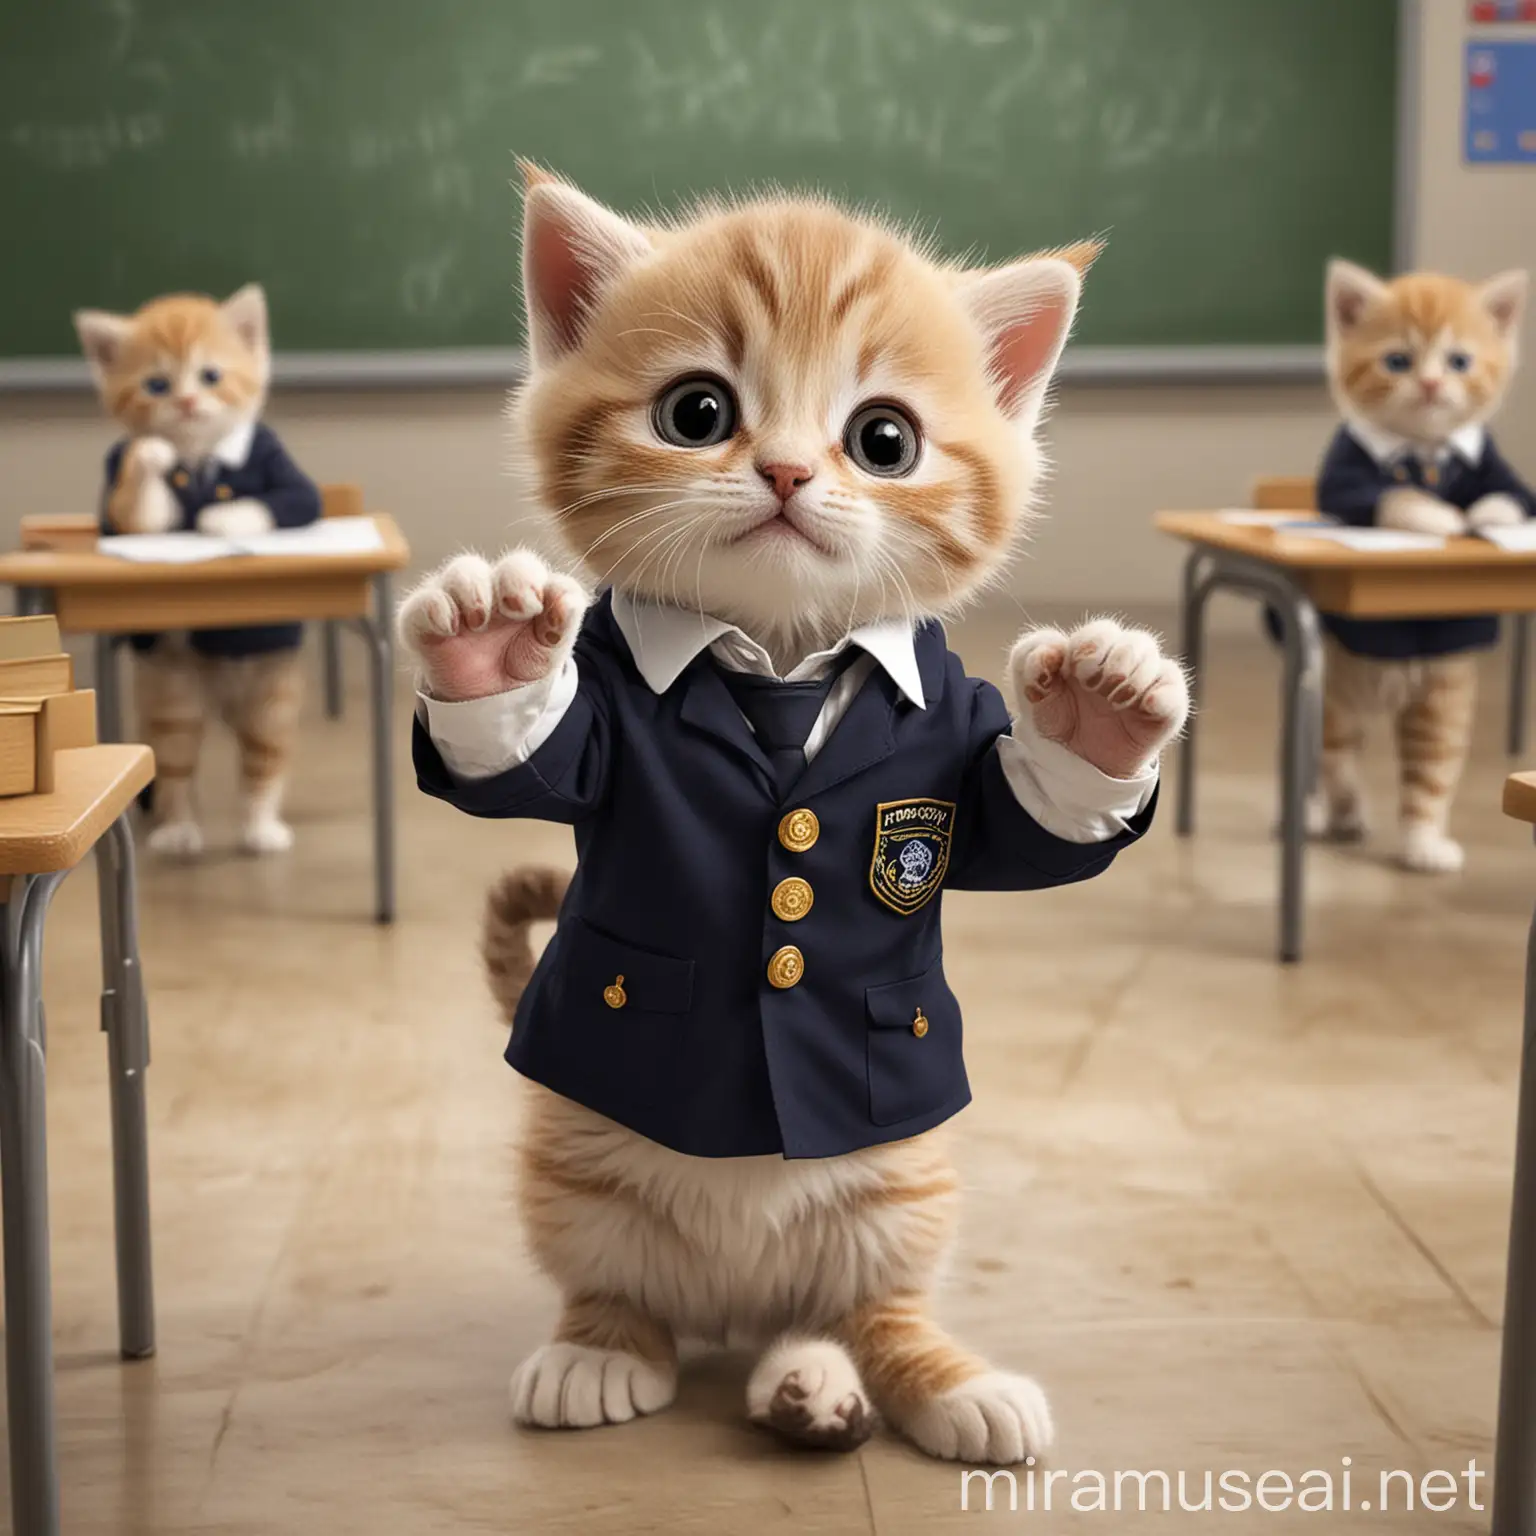 Adorable Kitten in Classroom Uniform Raises Paw to Answer Question